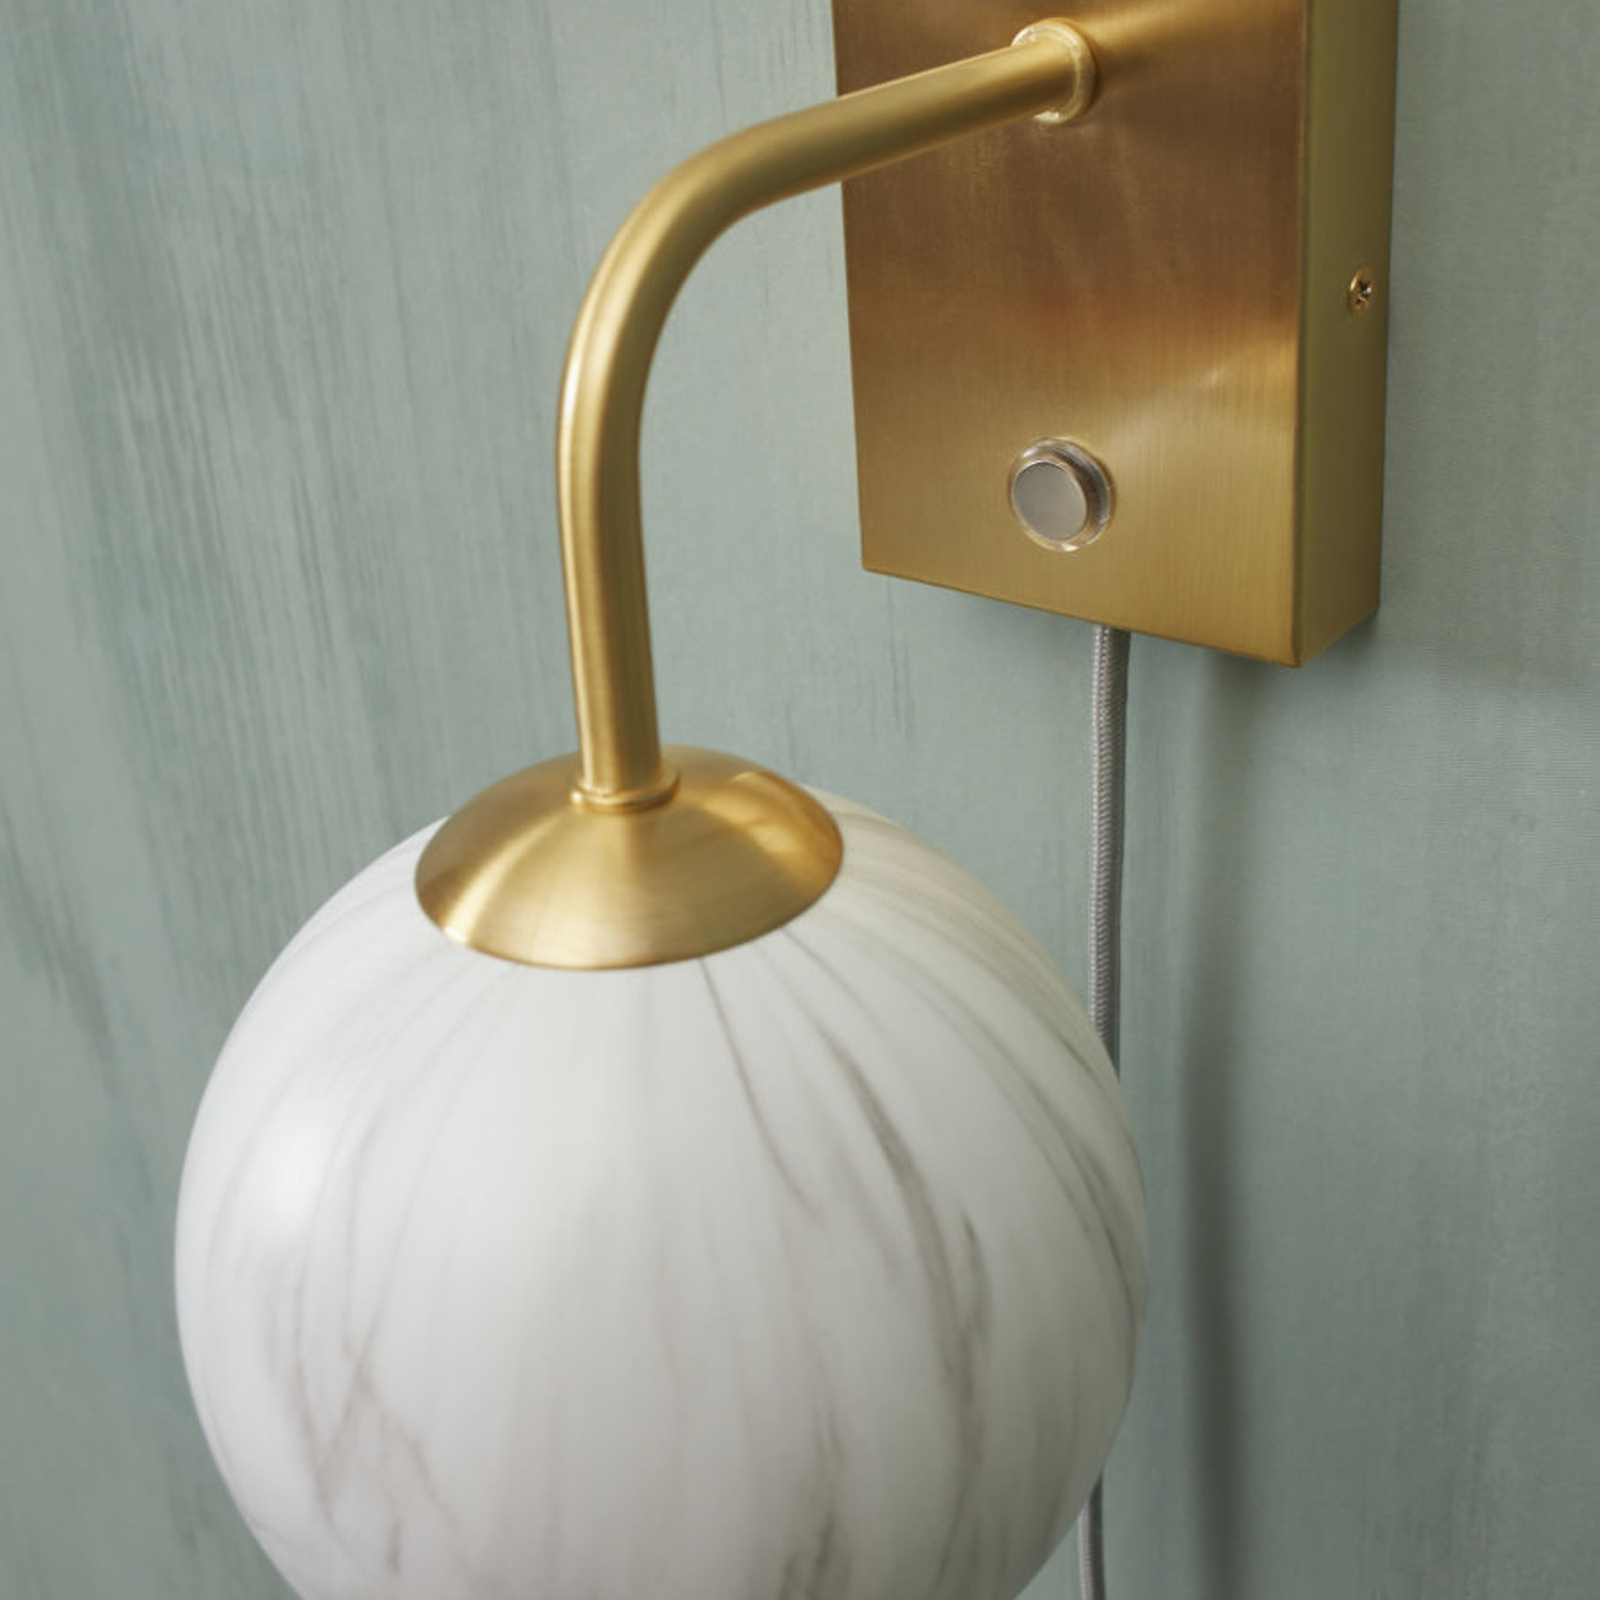 It’s about RoMi Carrara wall lamp, gold/marble